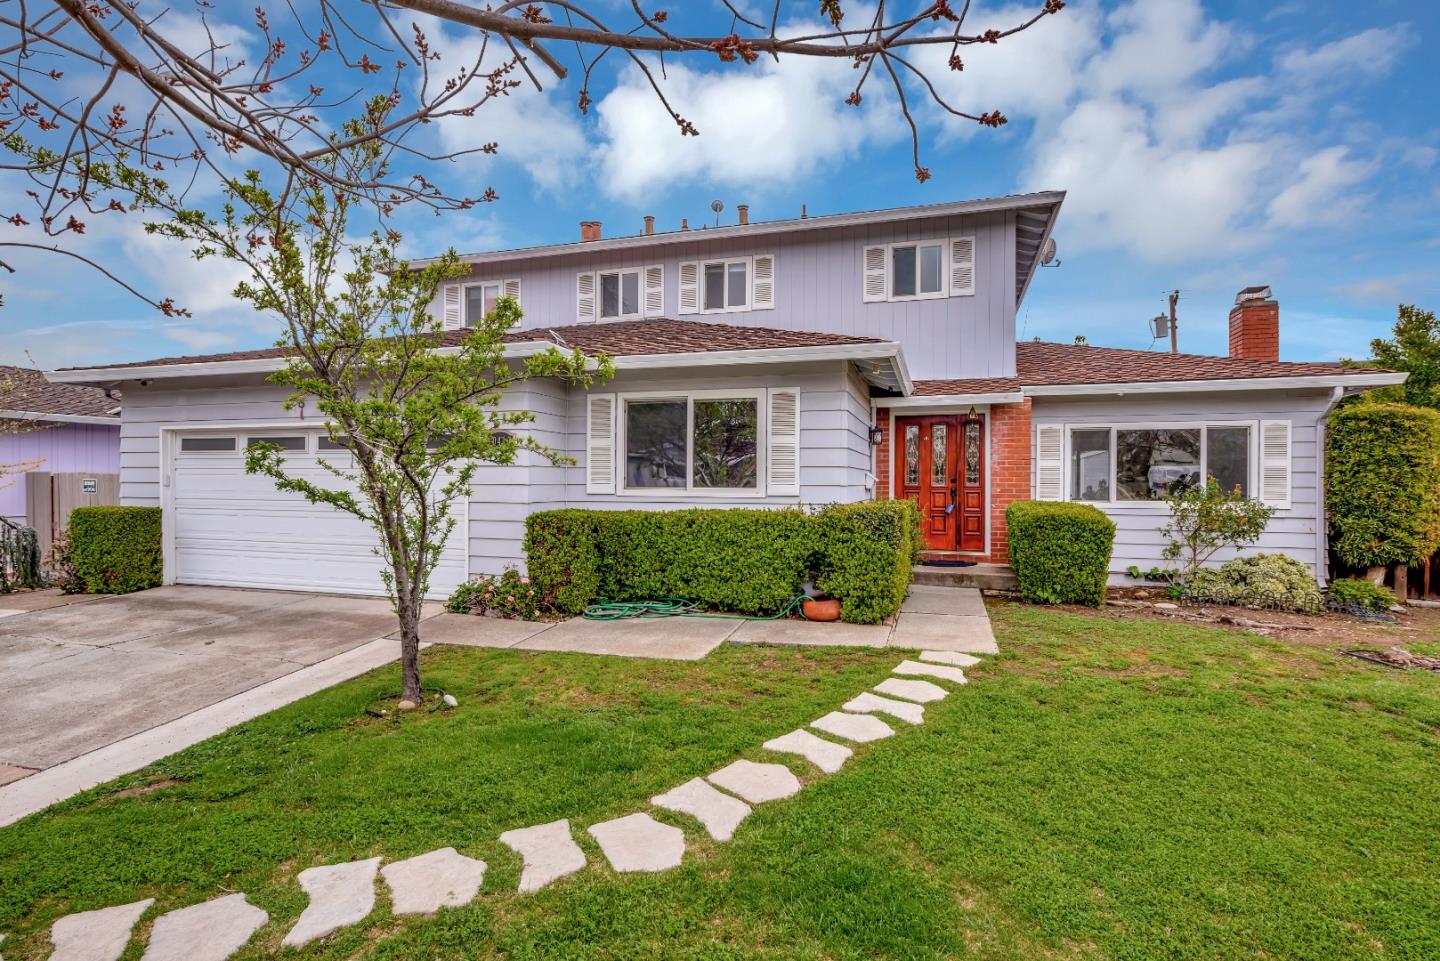 10416 Paradise DR, CUPERTINO, CA 95014